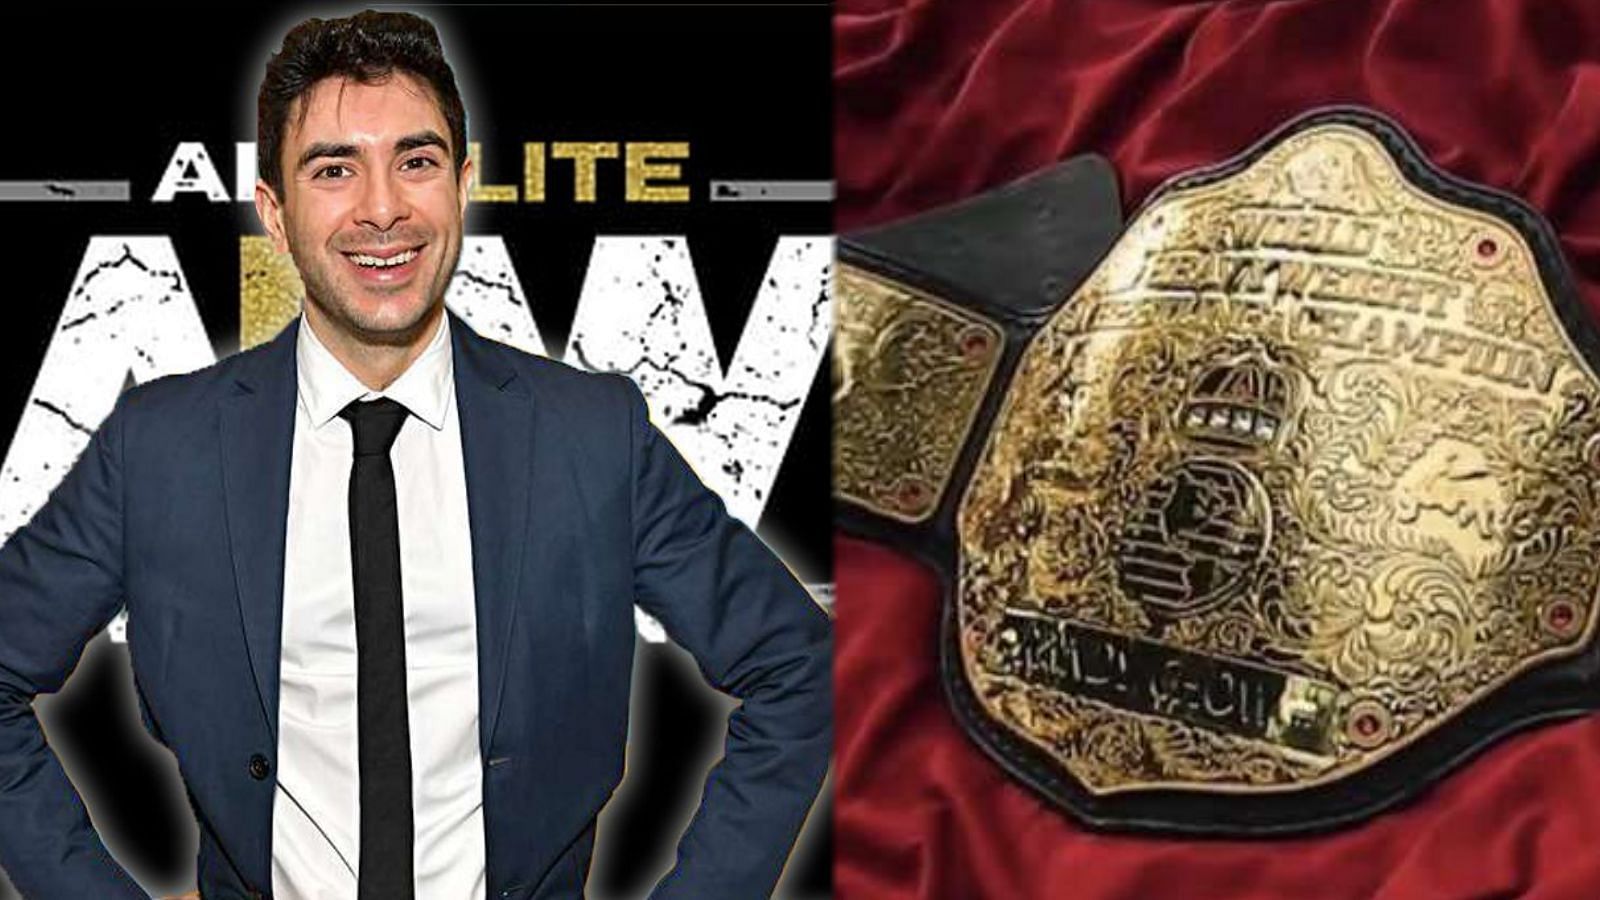 Tony Khan founded AEW nearly 3 years ago in 2019.